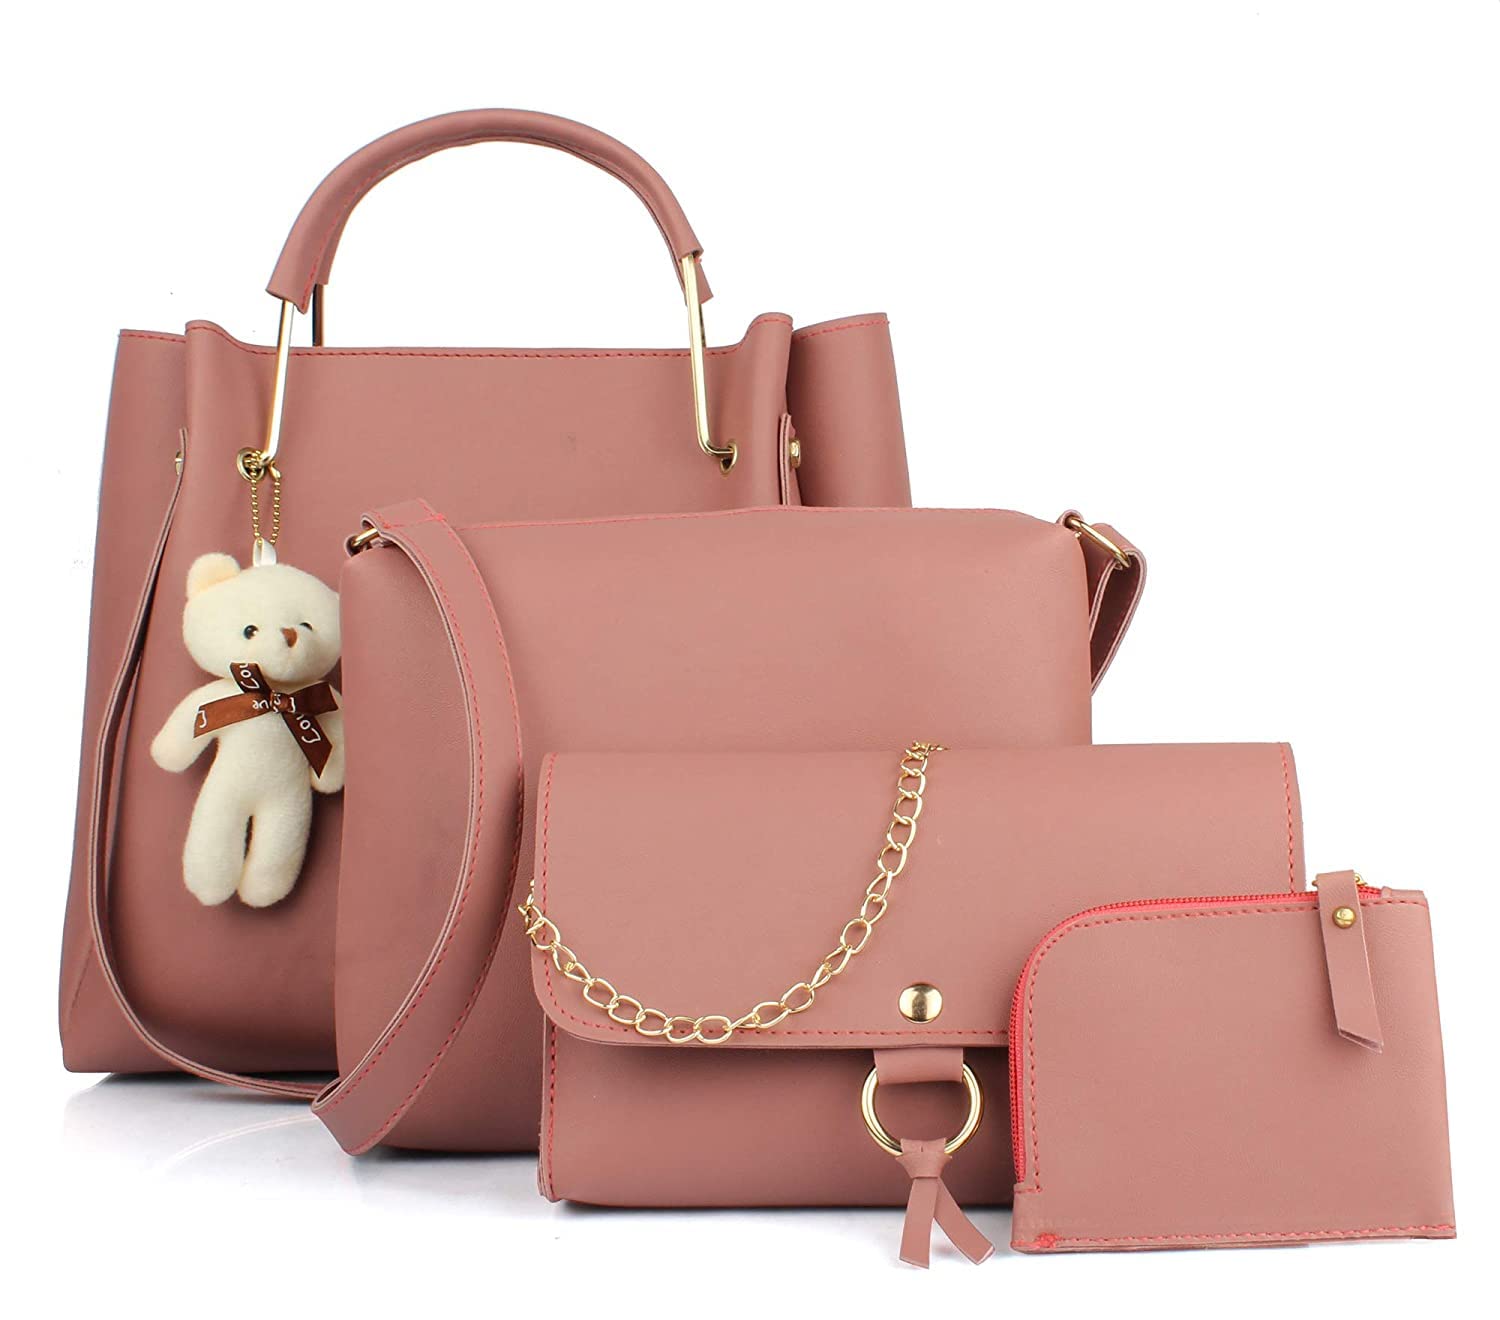 AUTHENTIC AK Women 4 Teddy Pink Combo Hand Bag A162 - Playful and Fashion-Forward